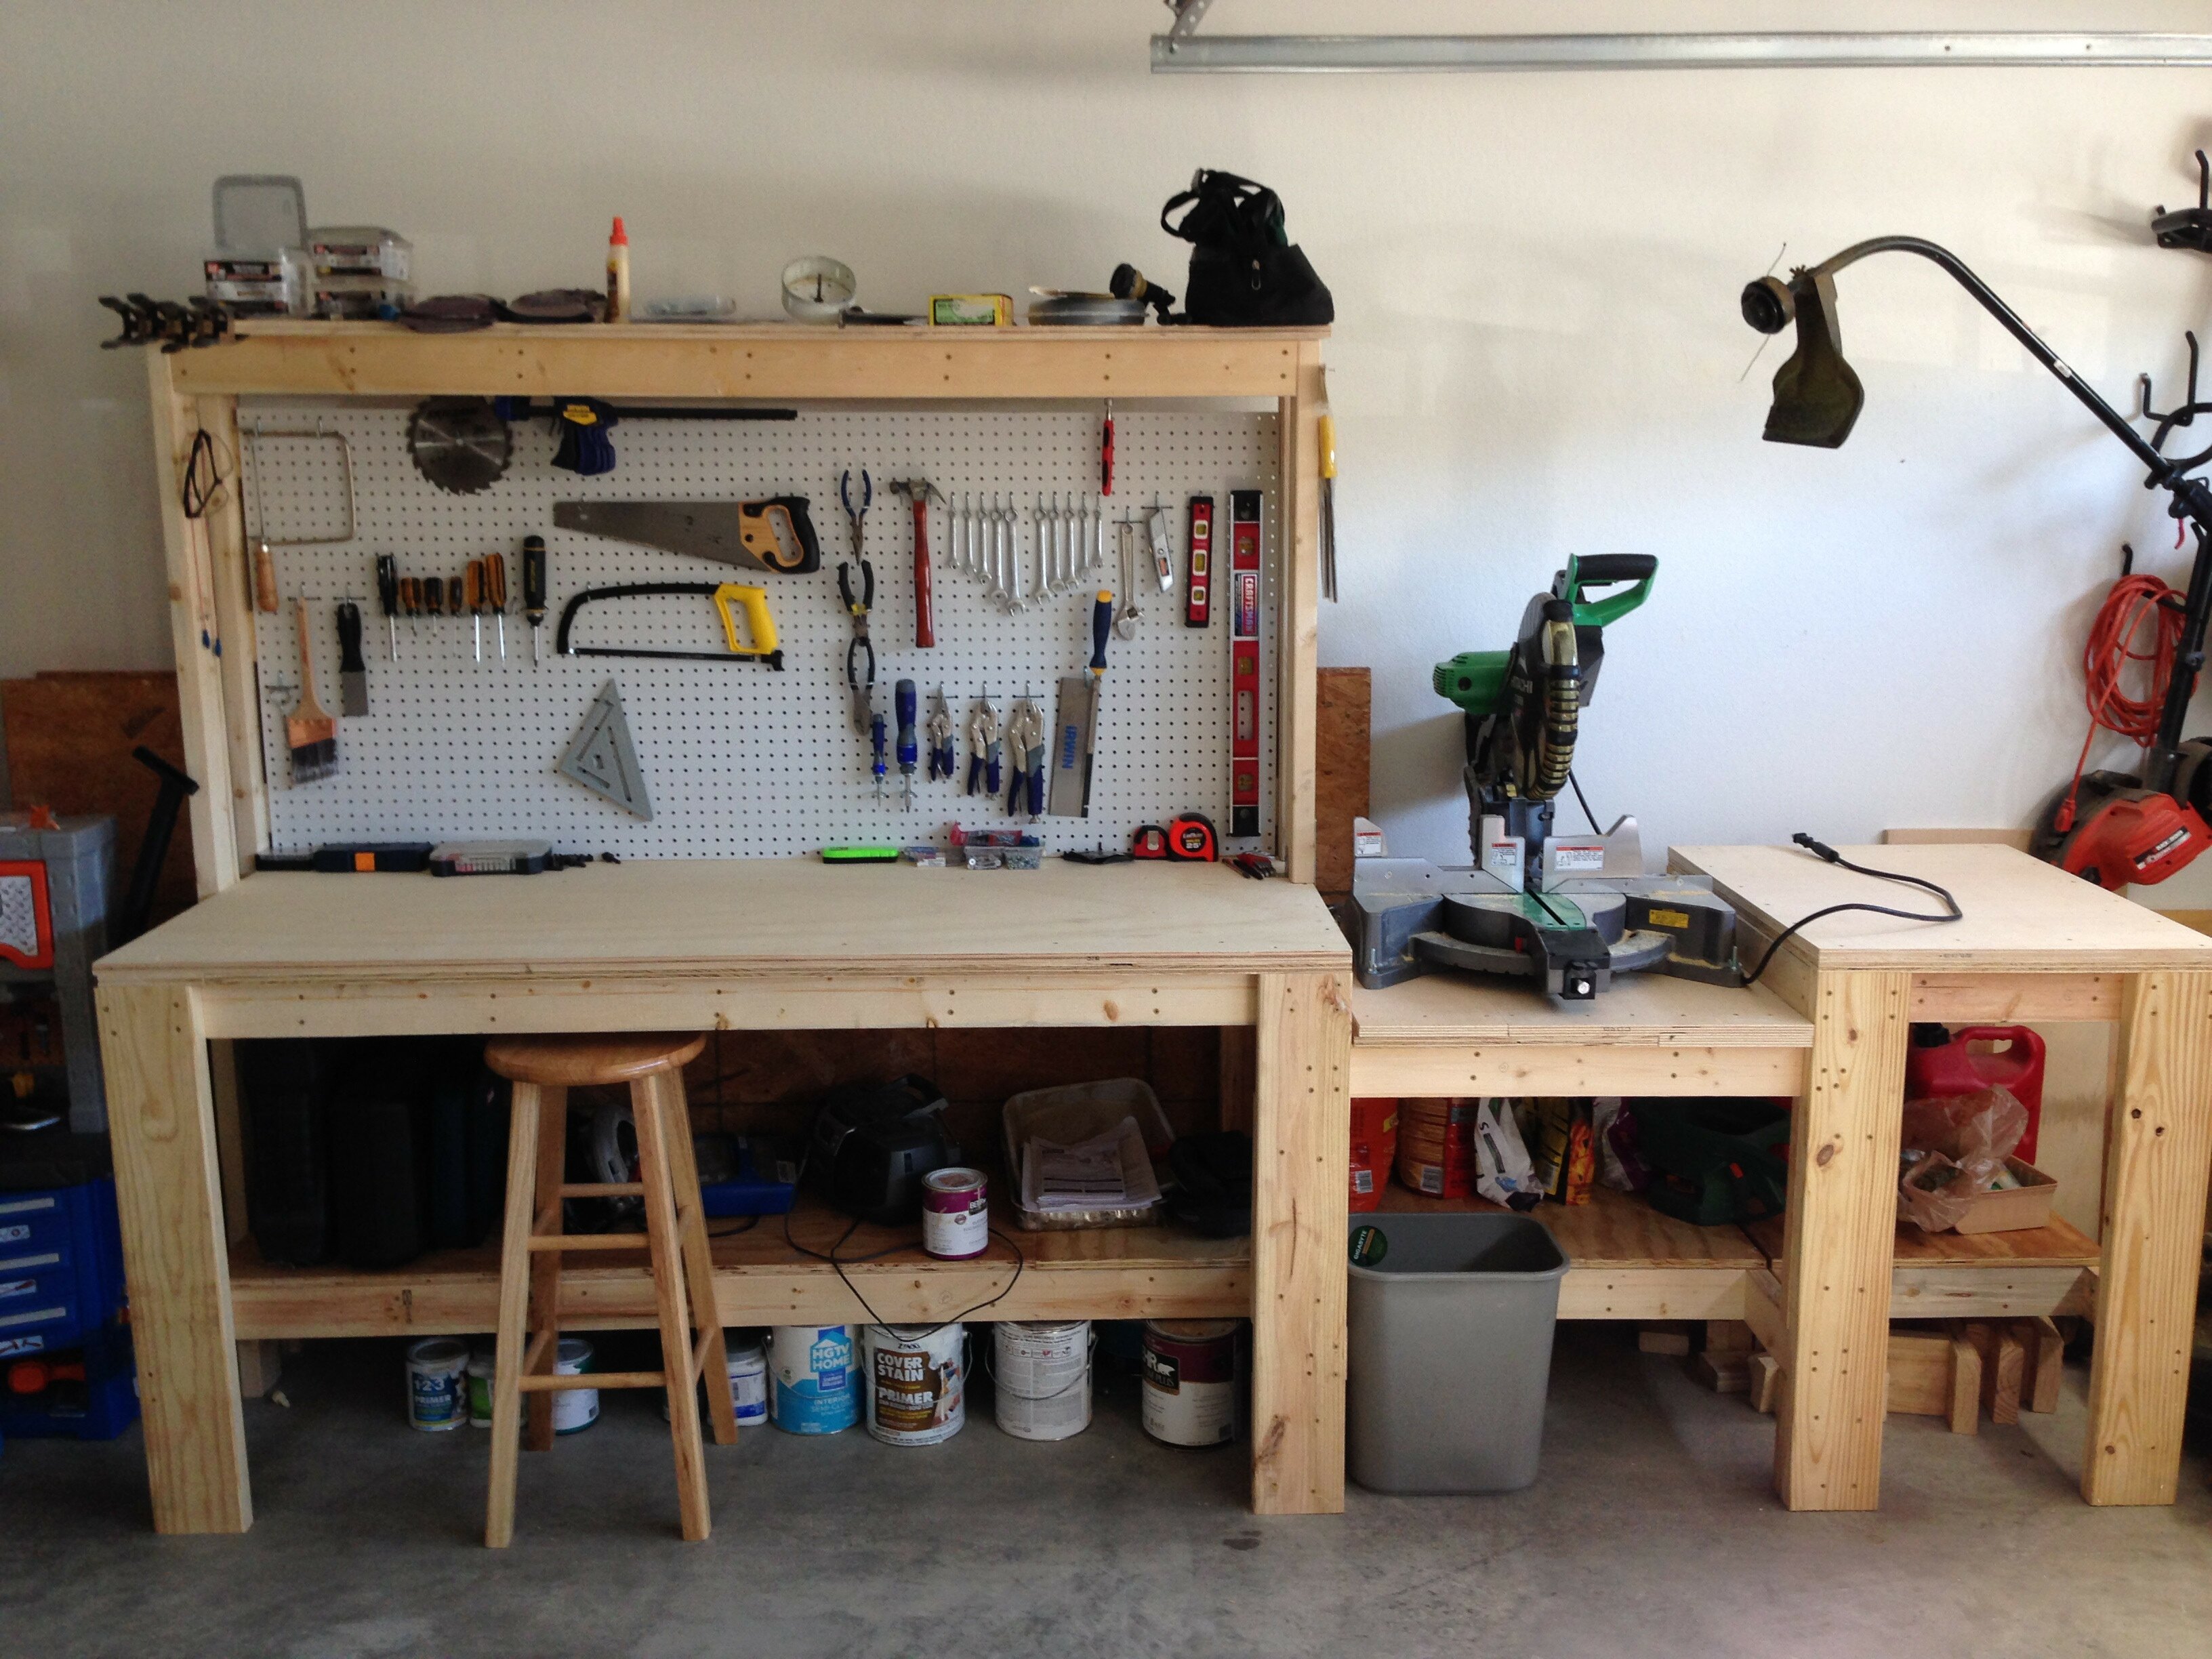 Wall Mounted Folding Workbench for Exciting Workspace Furniture Ideas: Hinged Workbench | Wall Mounted Folding Workbench | Space Saving Workbench